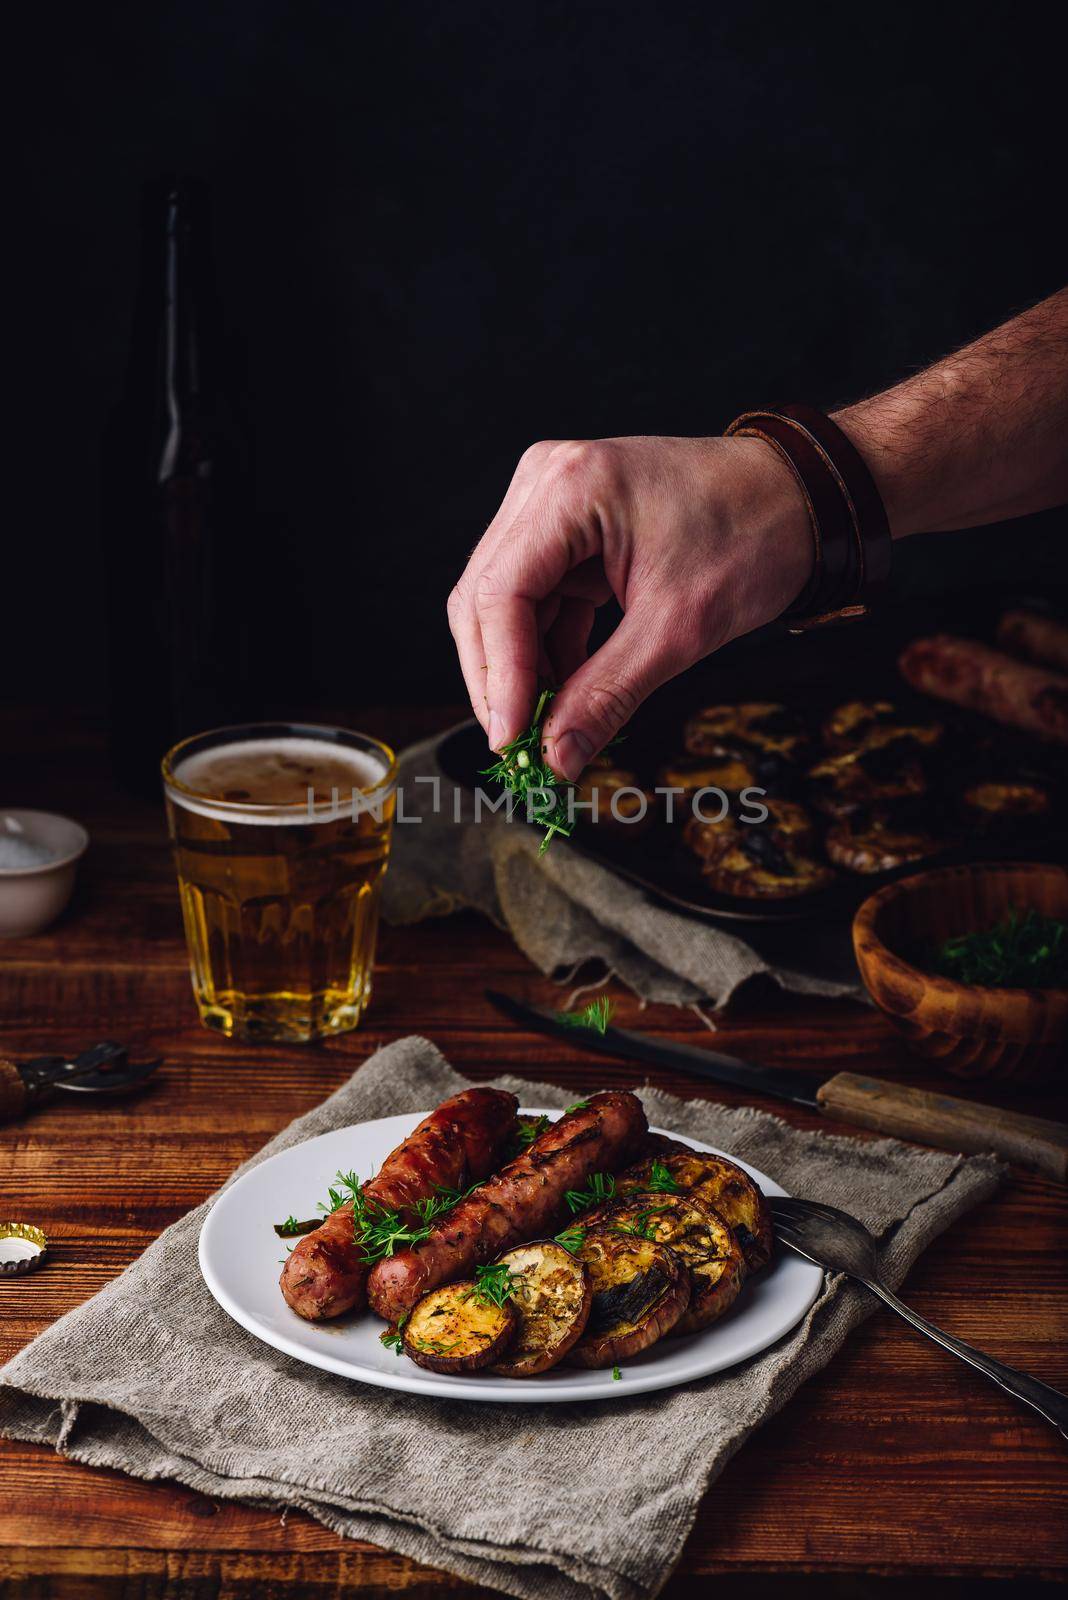 Pork Sausages with Eggplant and Herbs by Seva_blsv